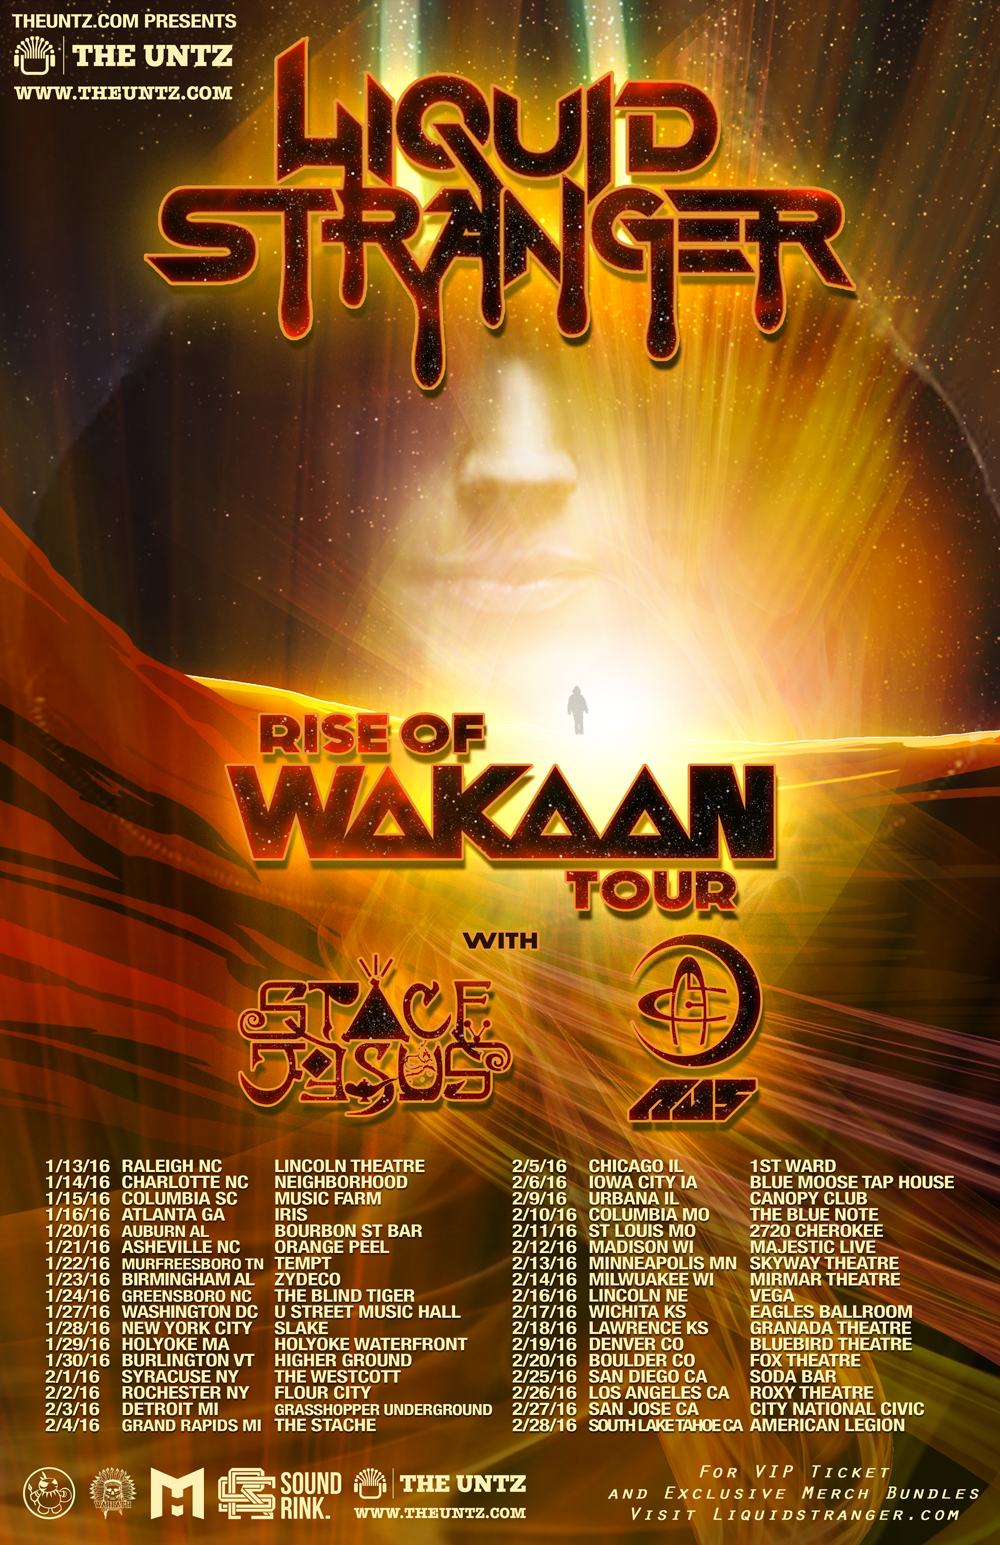 Rise of Wakaan Tour